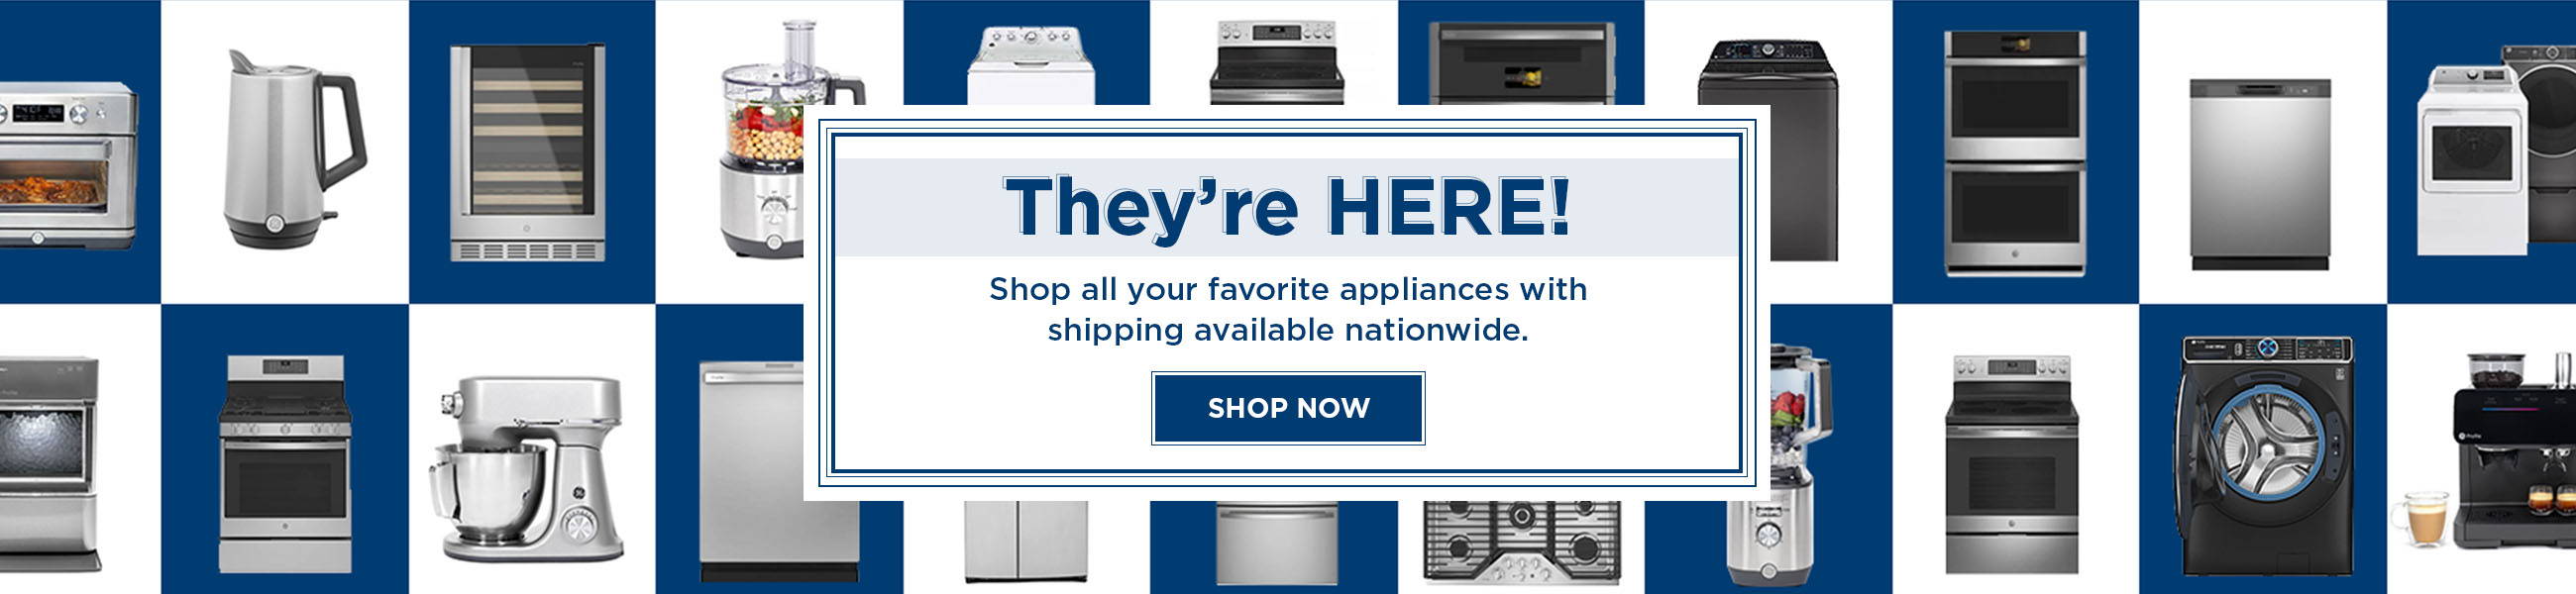 They're Here. Shop all your favorite appliances with shipping available nationwide.